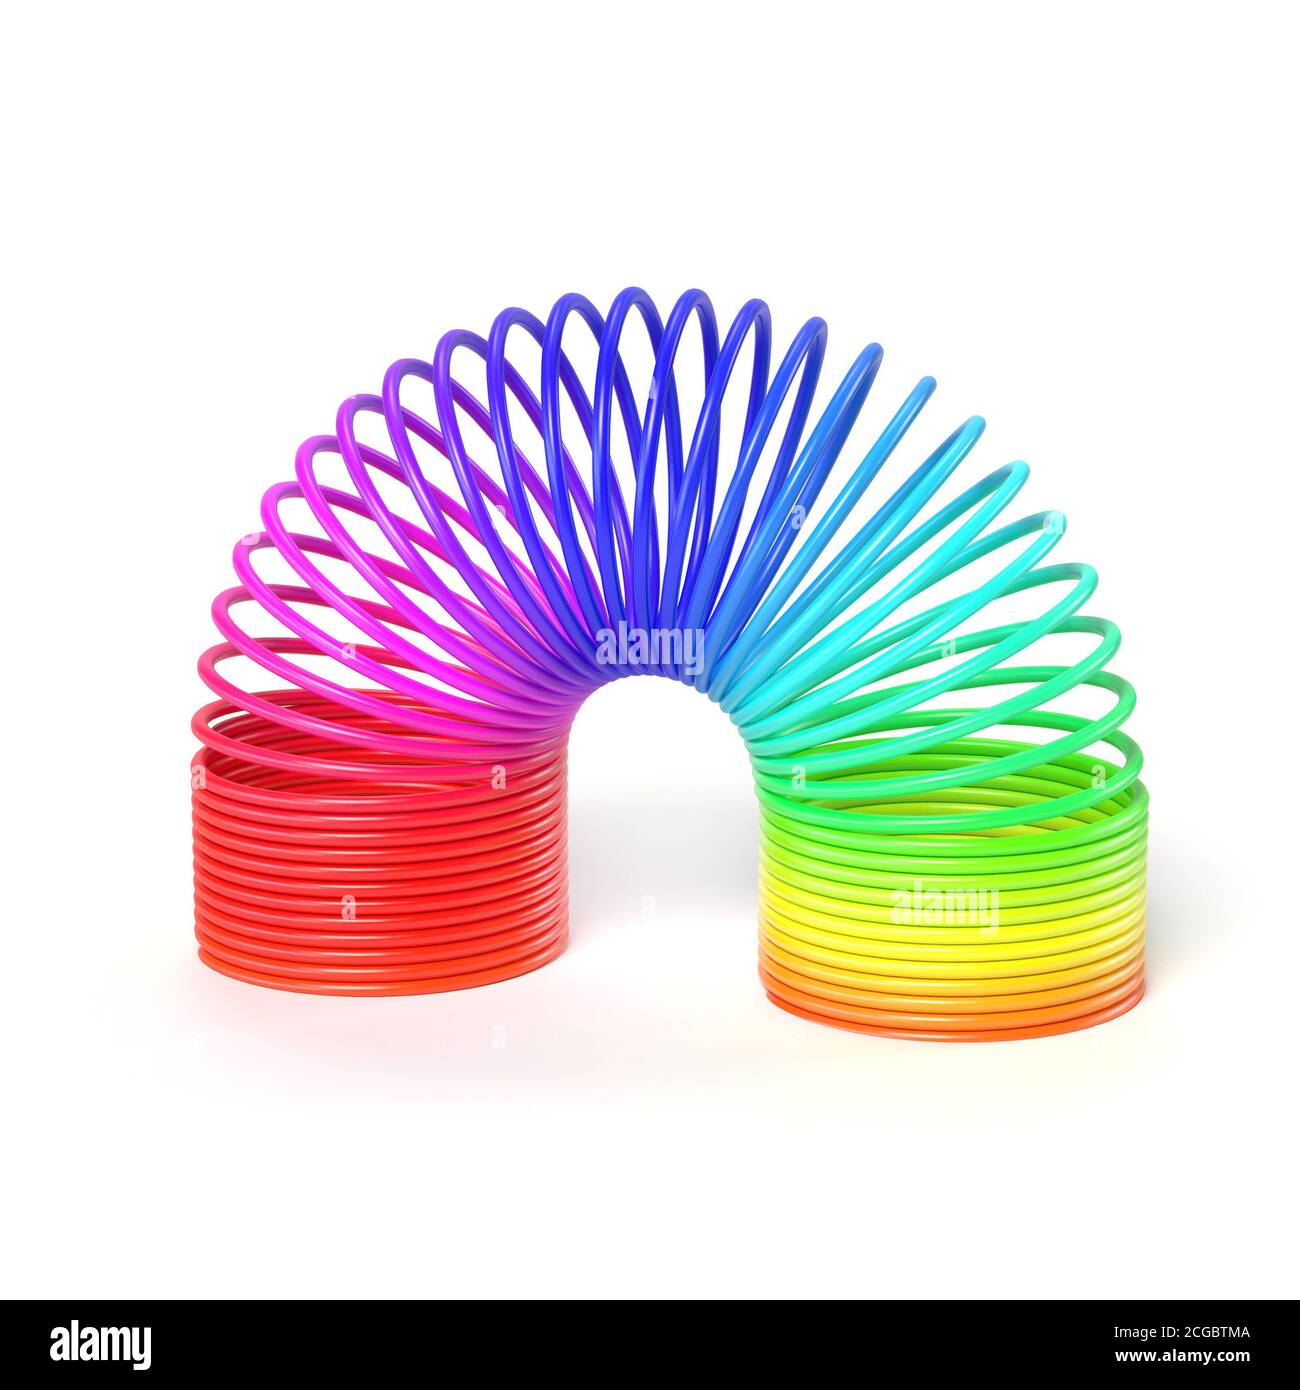 Spring toy, plastic colorful spring, 3d rendering Stock Photo